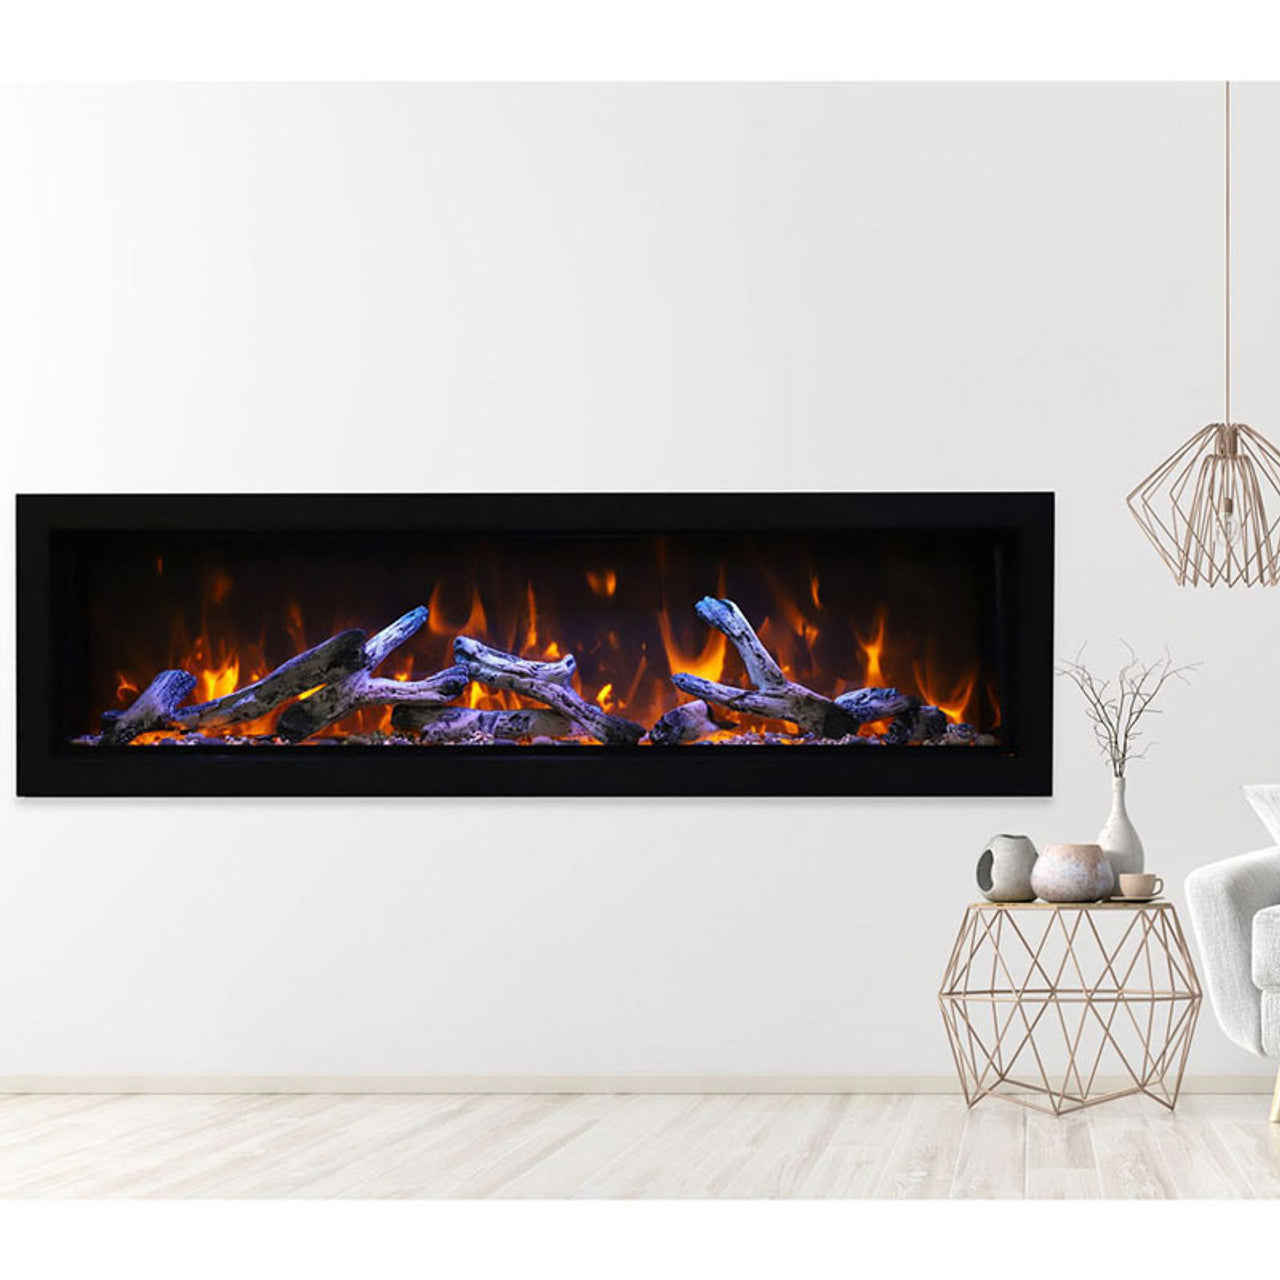 Remii Extra Tall 55" Electric Fireplace - 102755-XT - Chimney Cricket